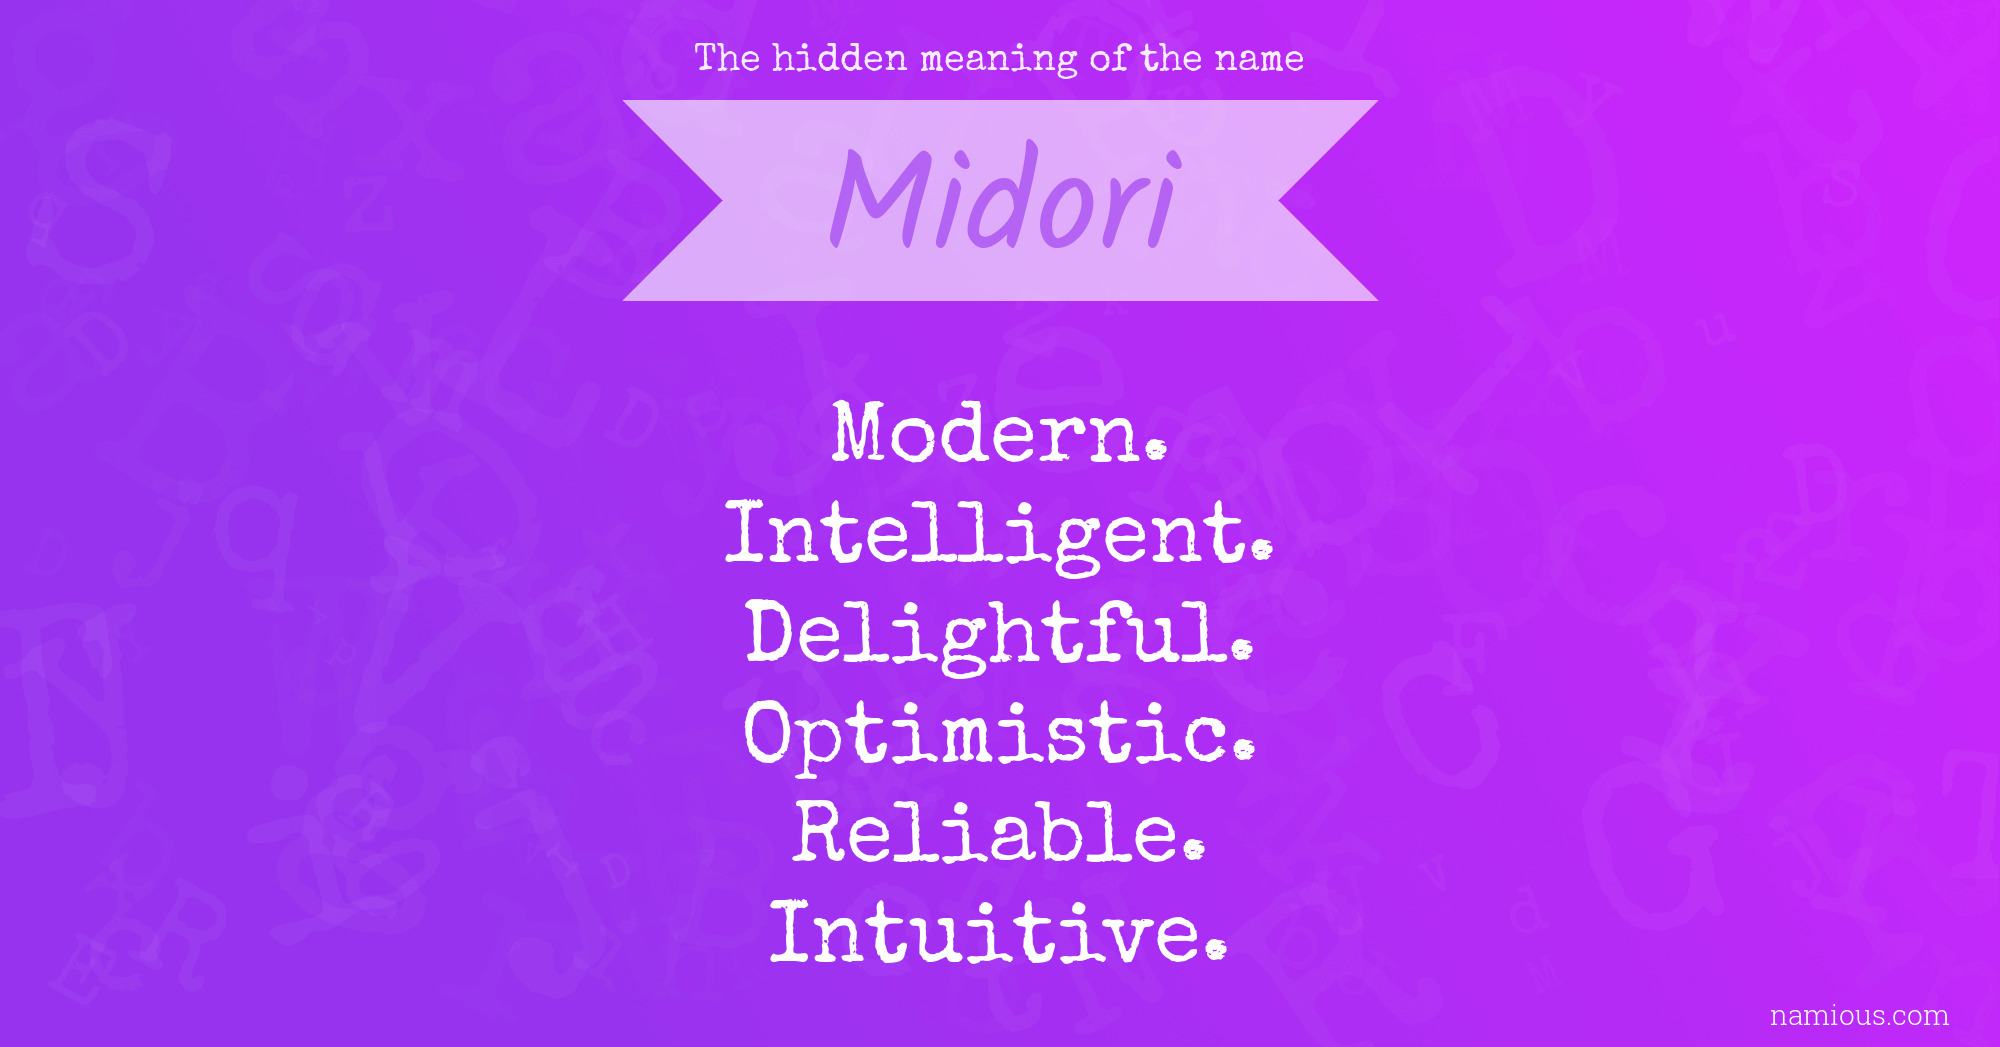 The hidden meaning of the name Midori